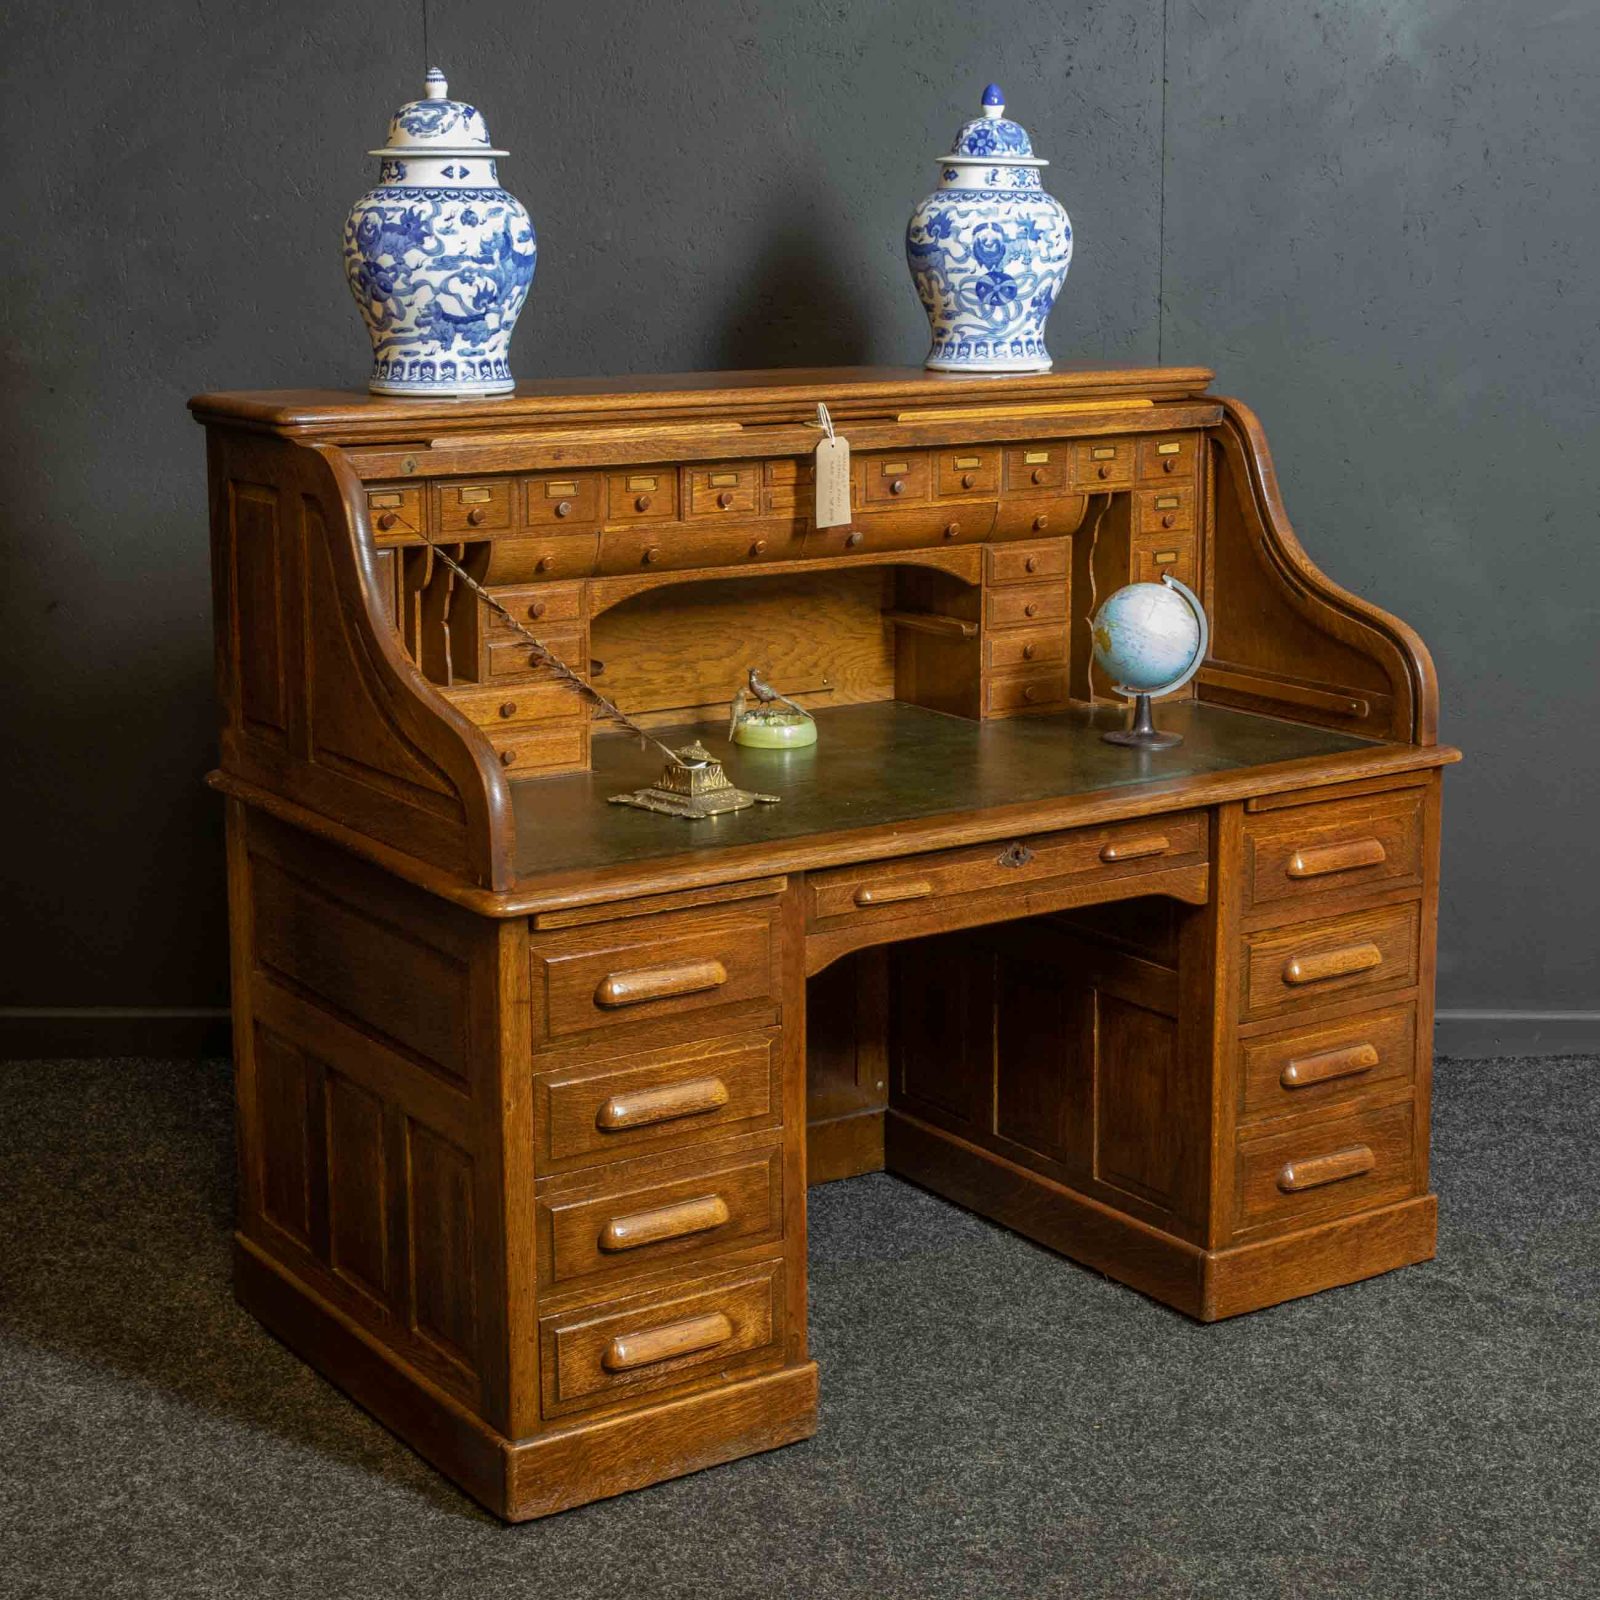 Edwardian Roll Top Desk by Maples of London and Paris